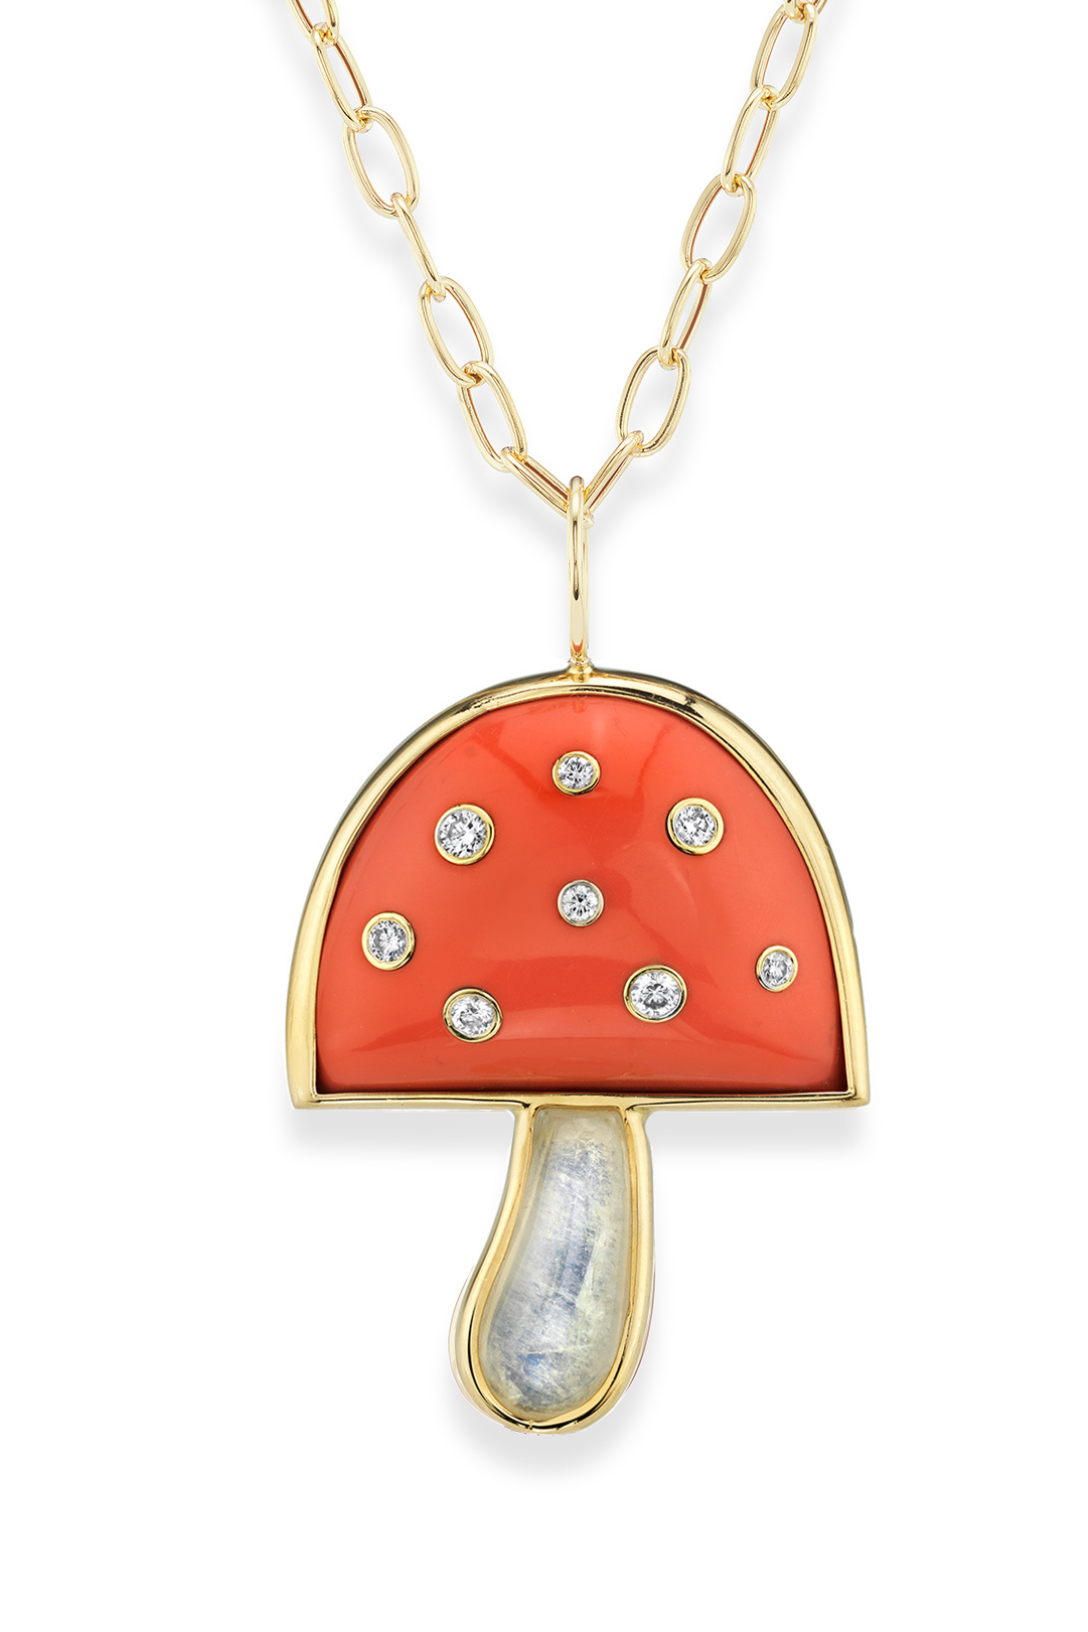 Brent Neale Small Marianne 18-karat Moonstone And Diamond Necklace - Gold |  Editorialist